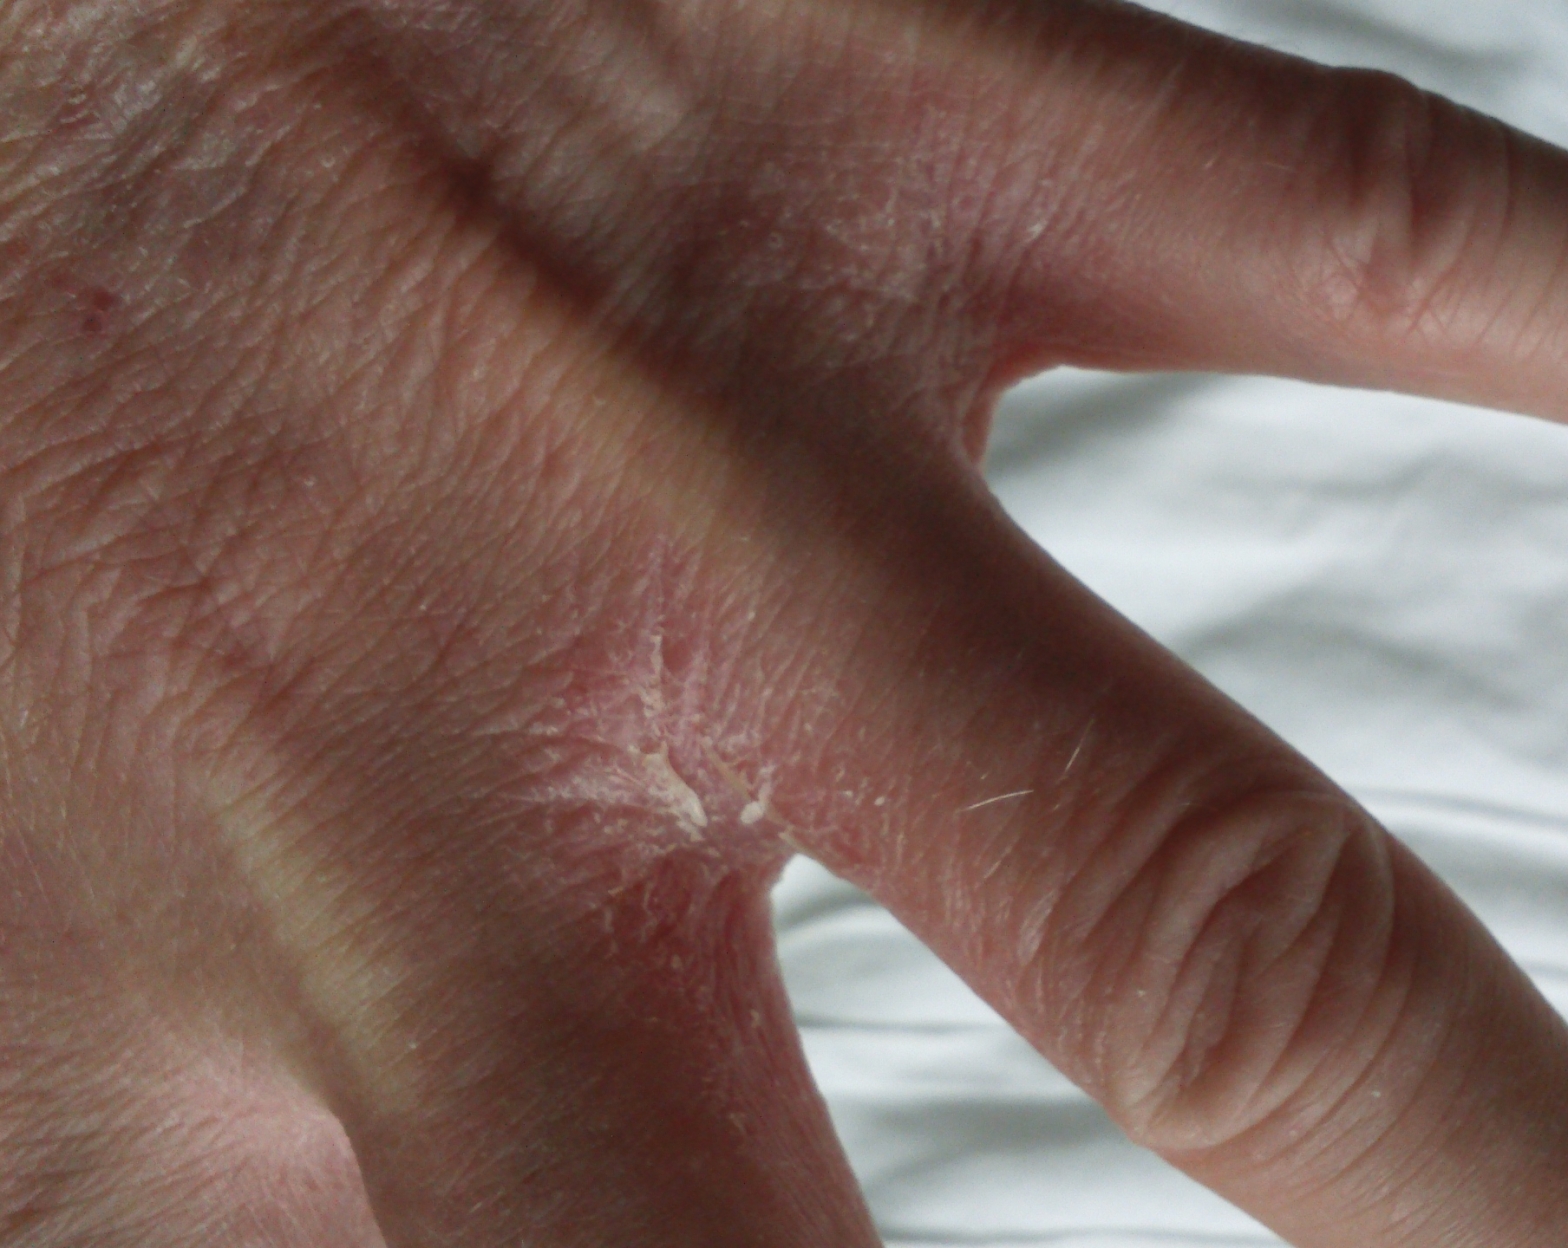 TOXIC HEALTH CO UK Eczema hand getting dry with cracking